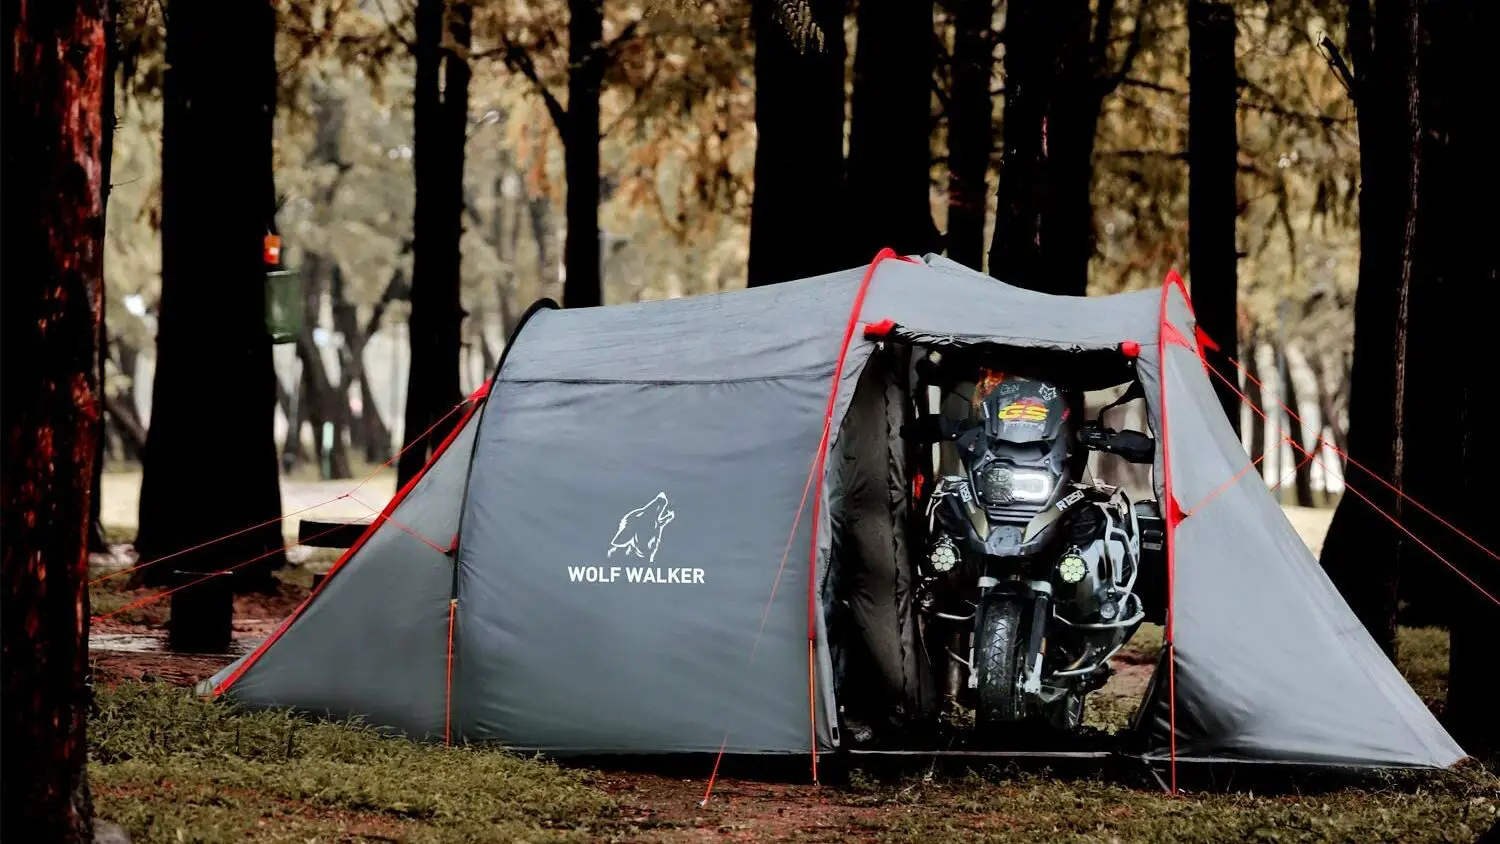 Wolf-Walker-Motorcycle-Tent-for-Camping-2-3-Person-Waterproof-Instant-Tents-with-Integrated-Motorcycle